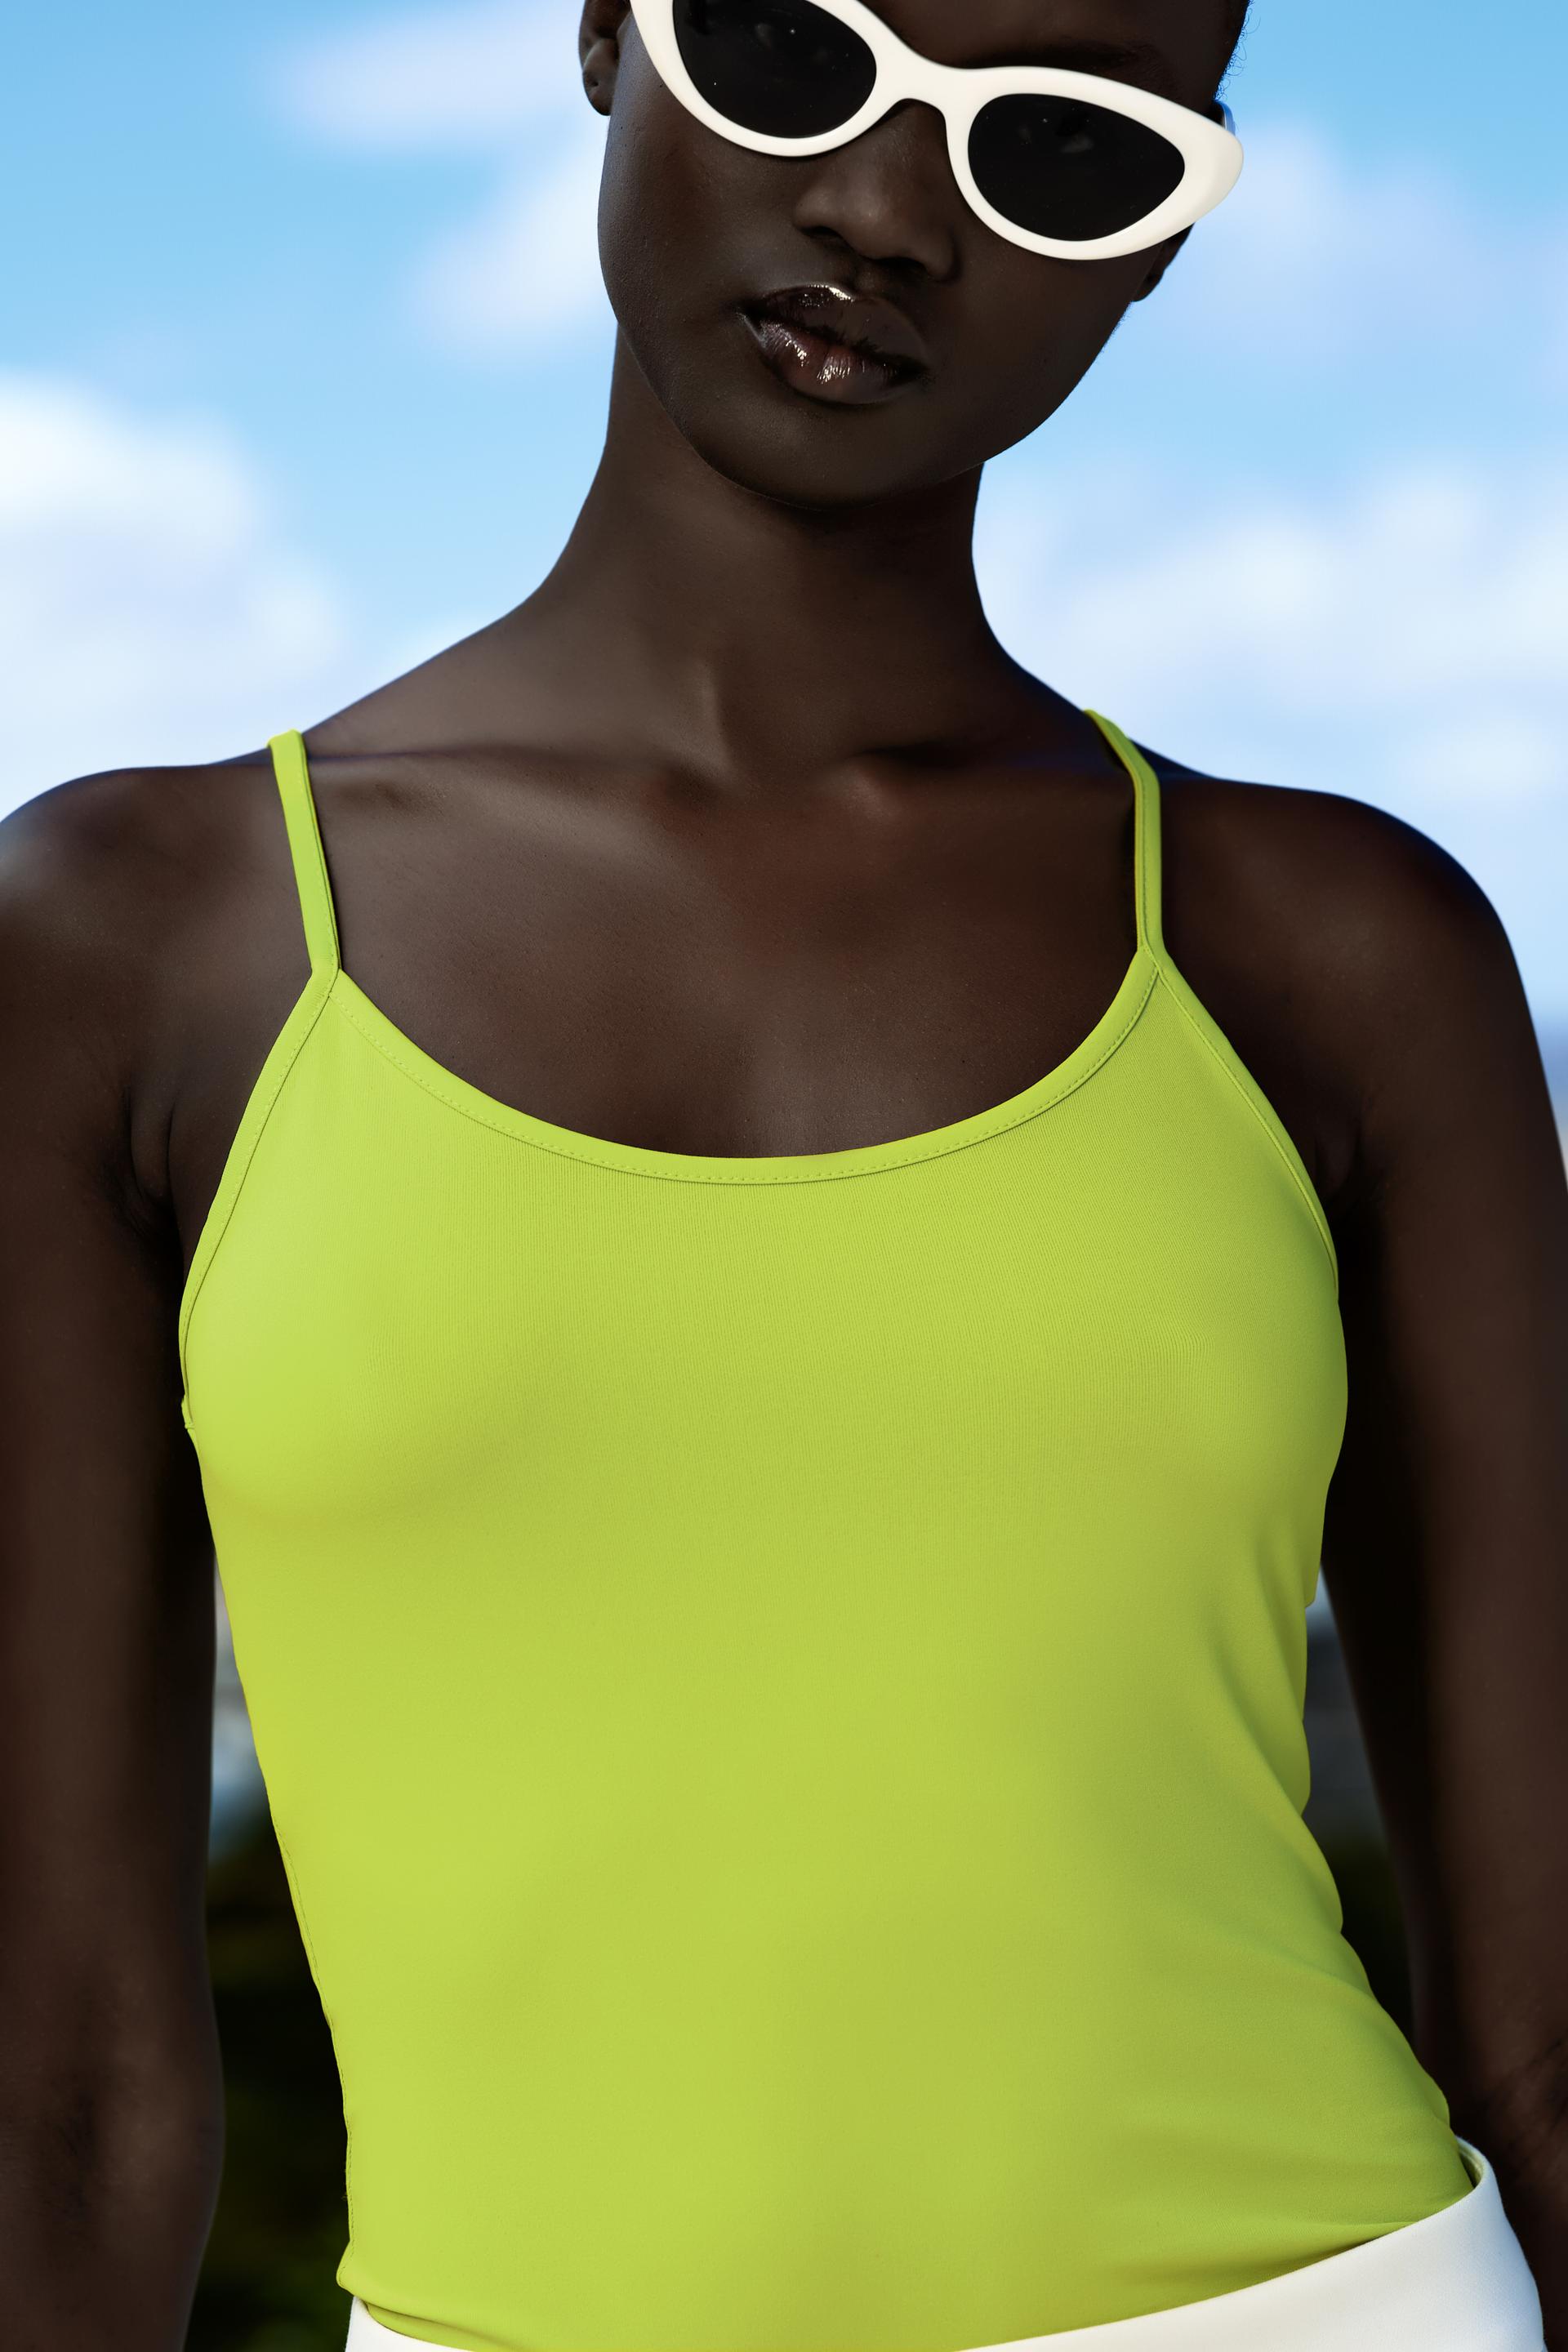 Women's Spaghetti Strap Neon Yellow Color Sleeveless Top T-03R – One Size  Fits